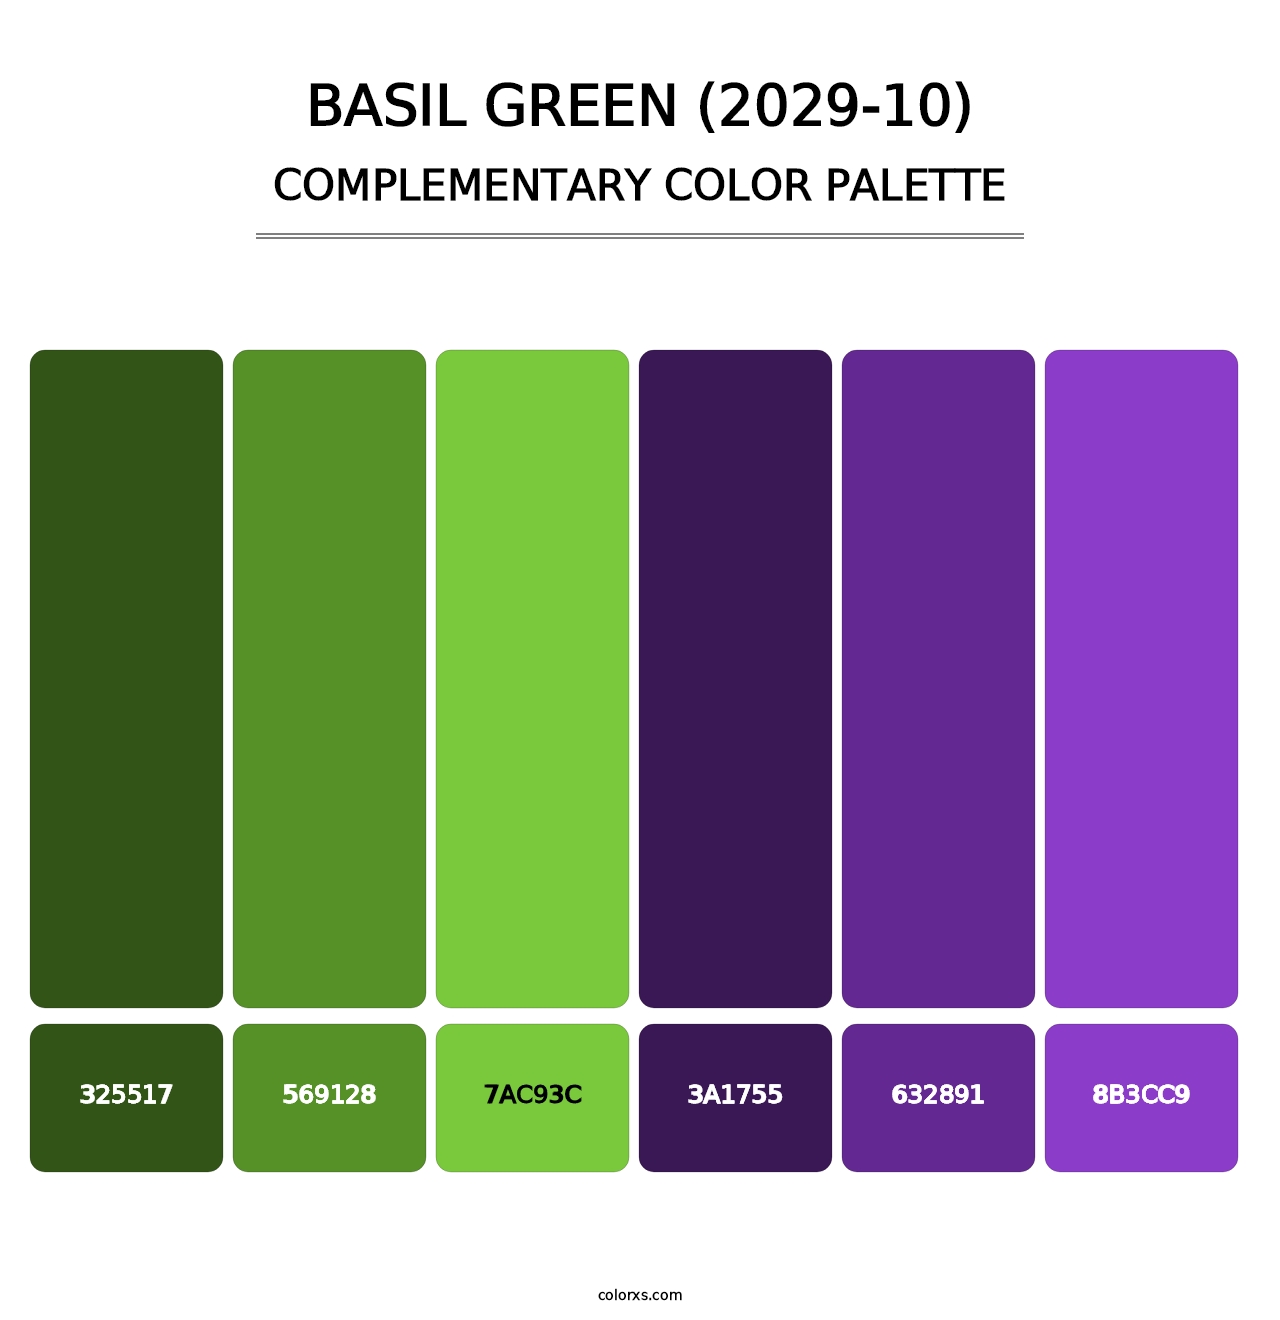 Basil Green (2029-10) - Complementary Color Palette